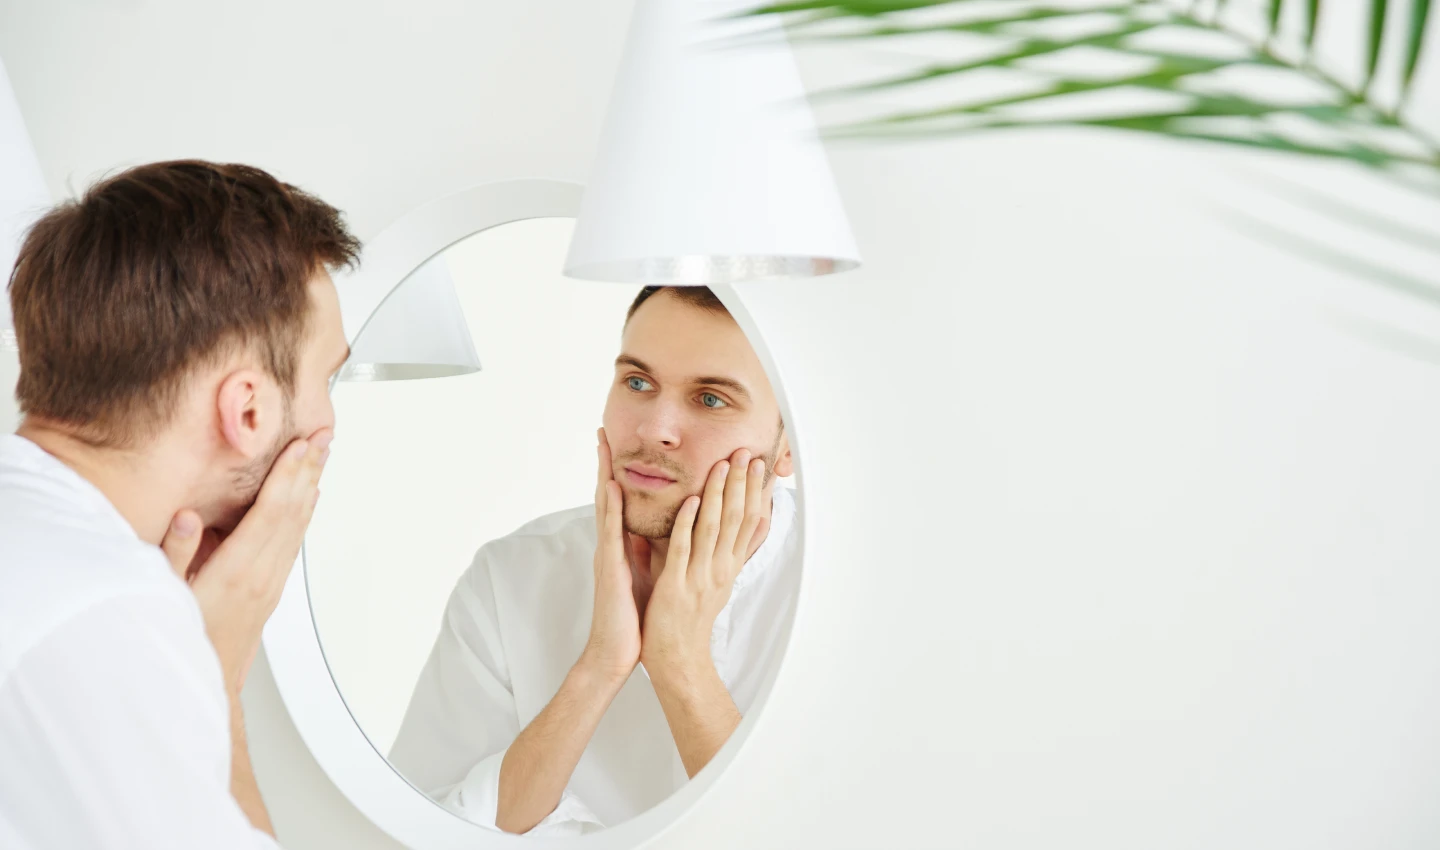 A man looking at himself in the mirror after using one of the best facial cleansers for men's skin types. He has a cleanly shaven face and looks happy and refreshed.